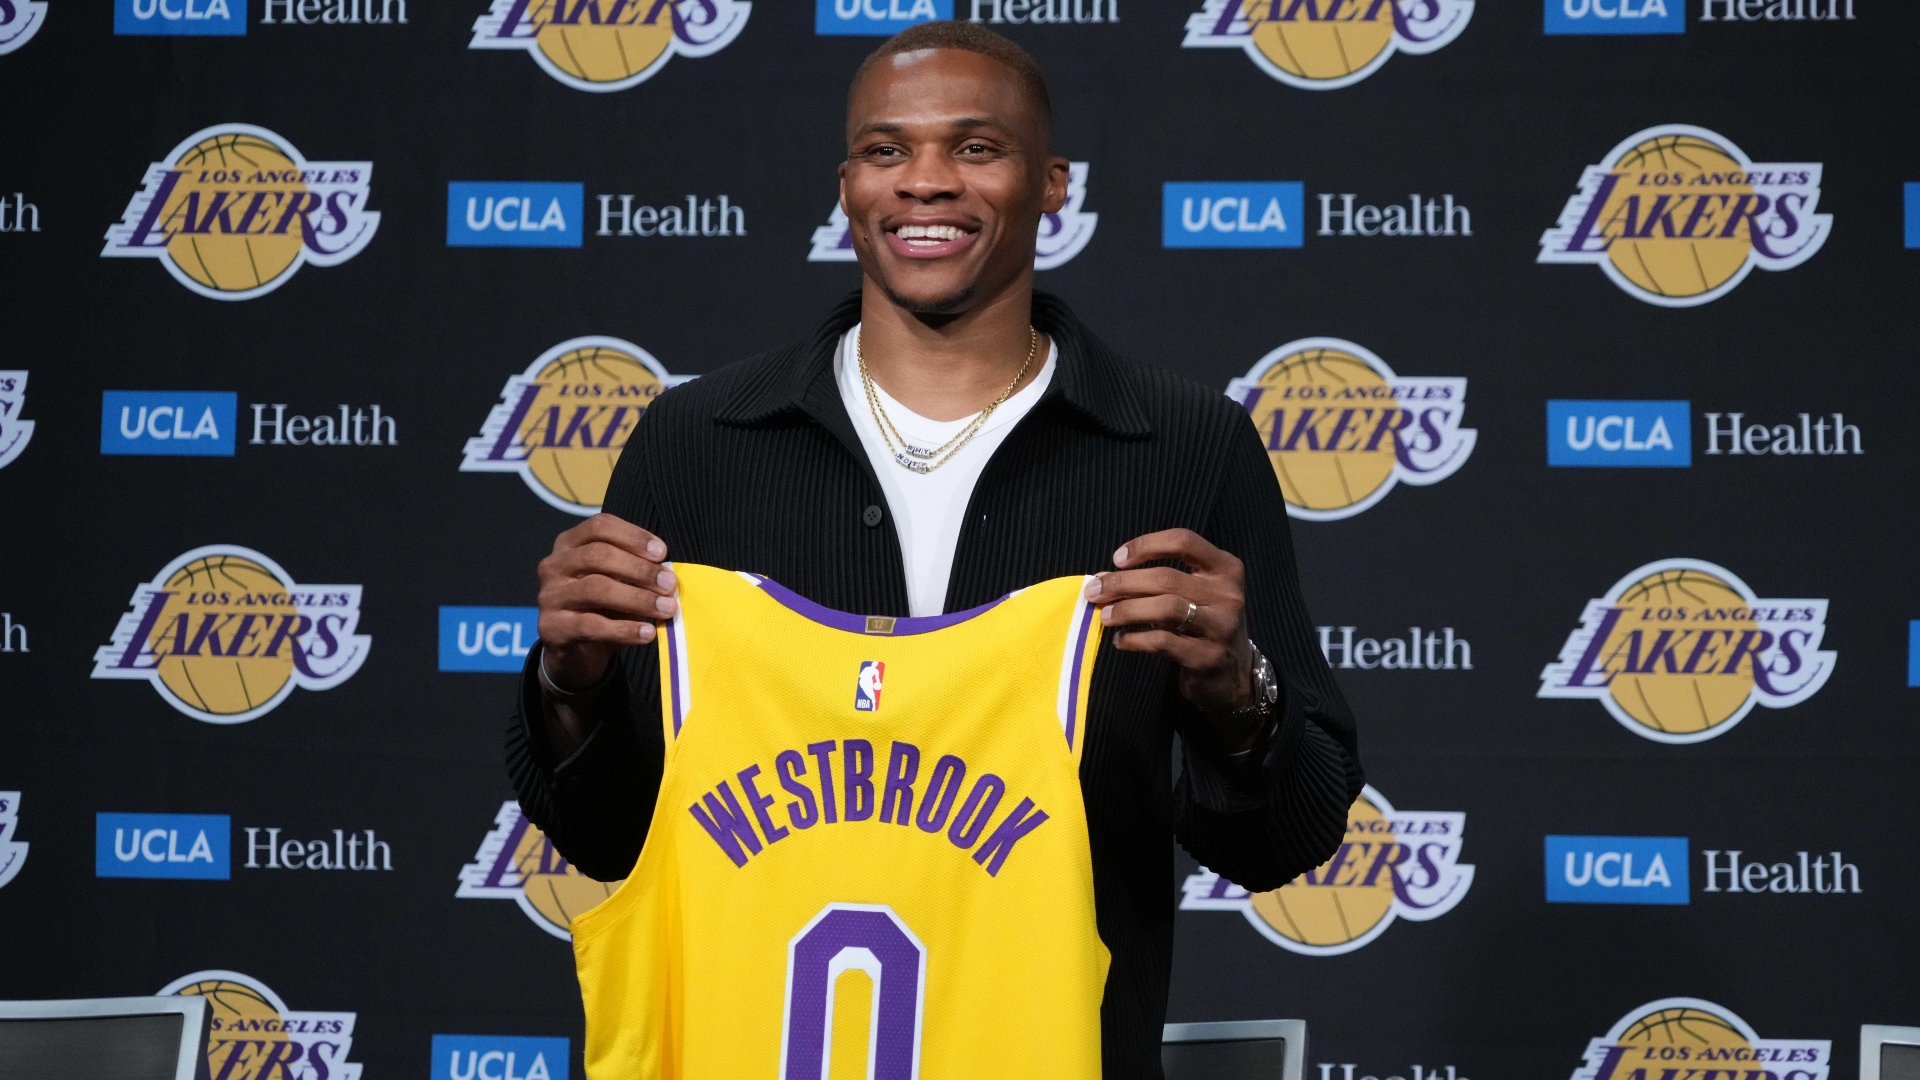 Russell Westbrook holds up his Lakers jersey during his introductory press conference